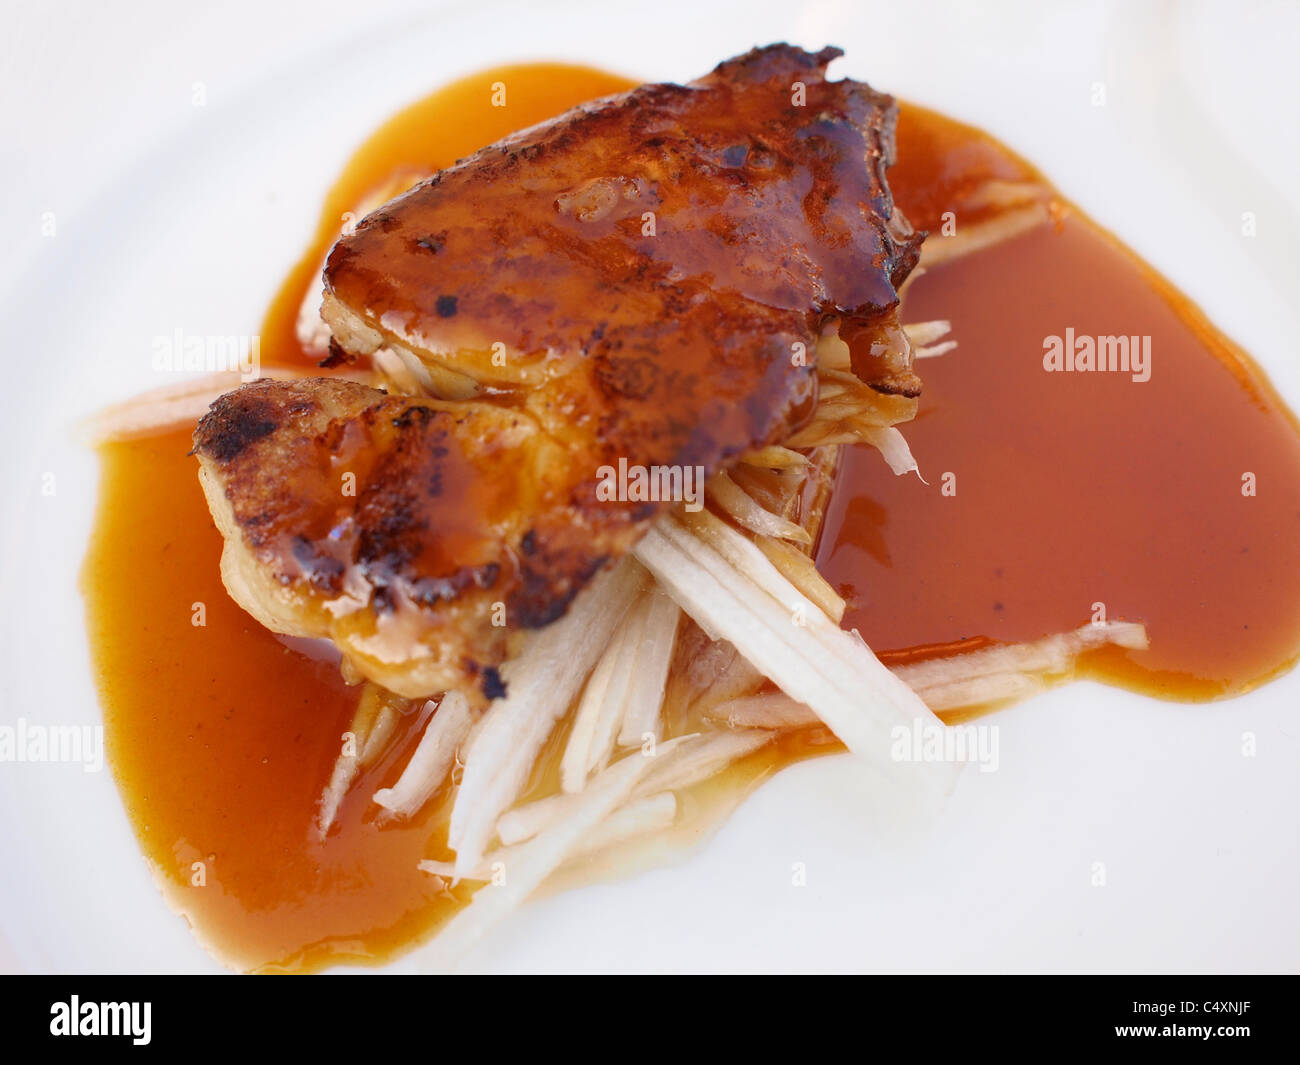 Veal sweetbread dish with soy sauce Stock Photo